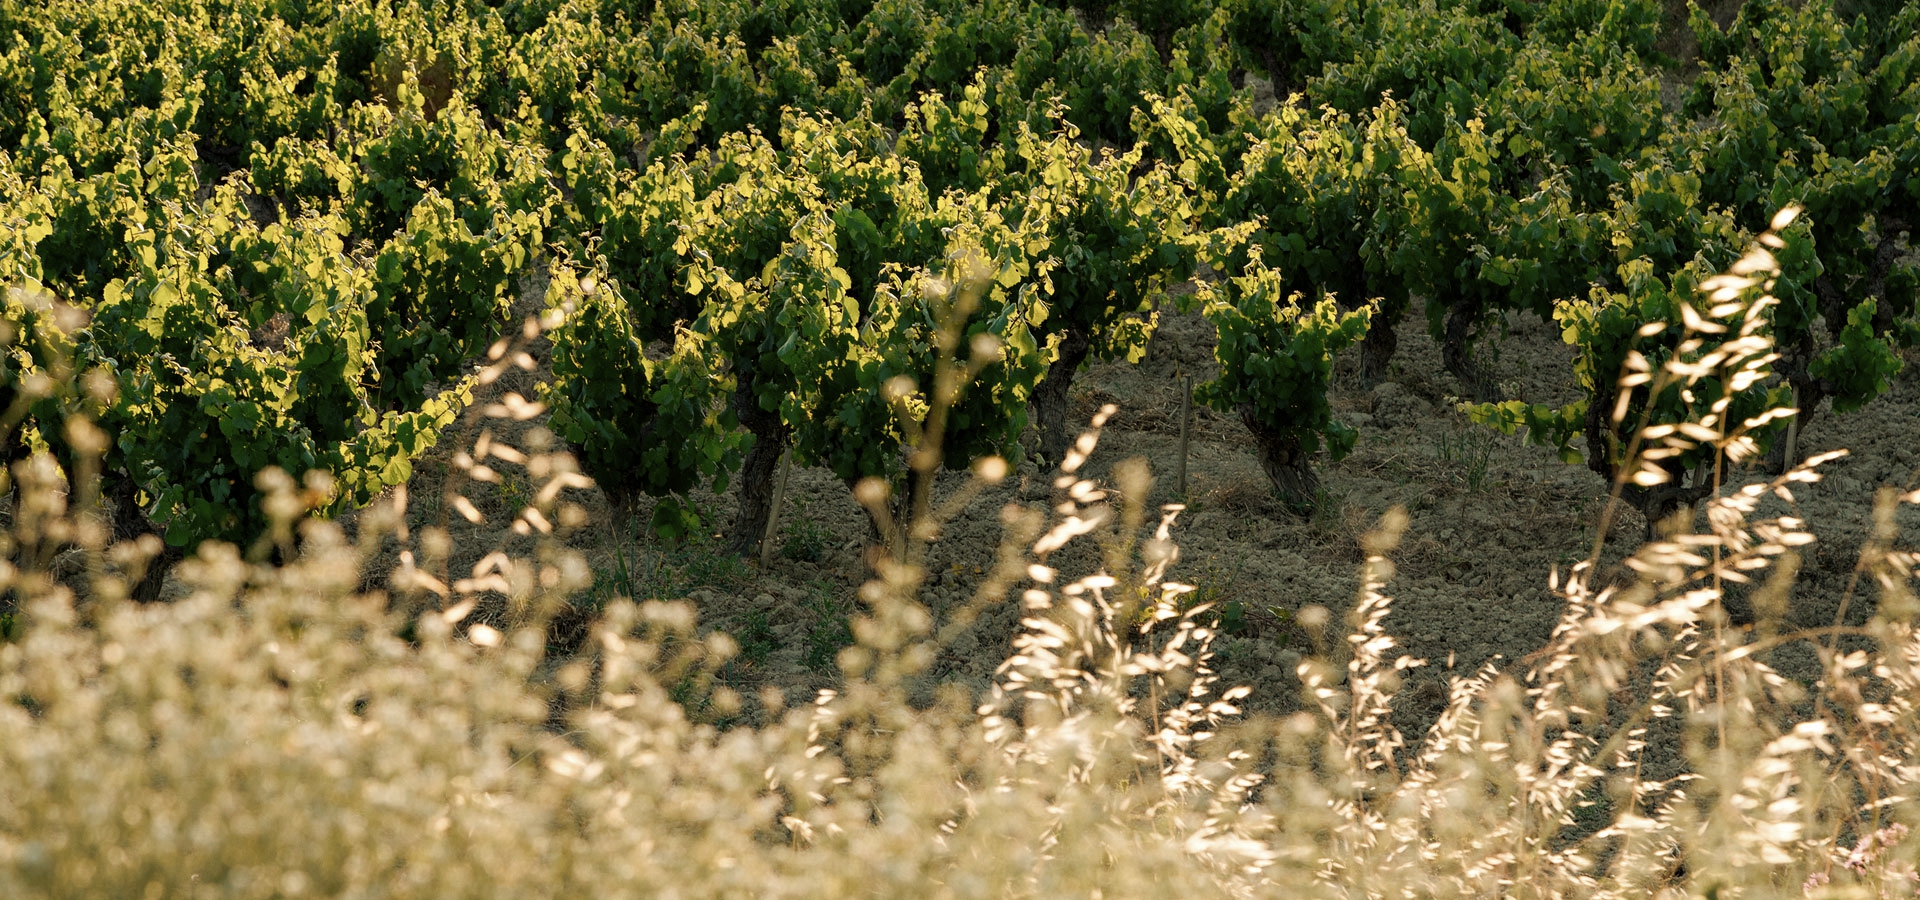 Pioneers in organic viticulture and biodynamic cultivation, producing catalan wines and cavas.